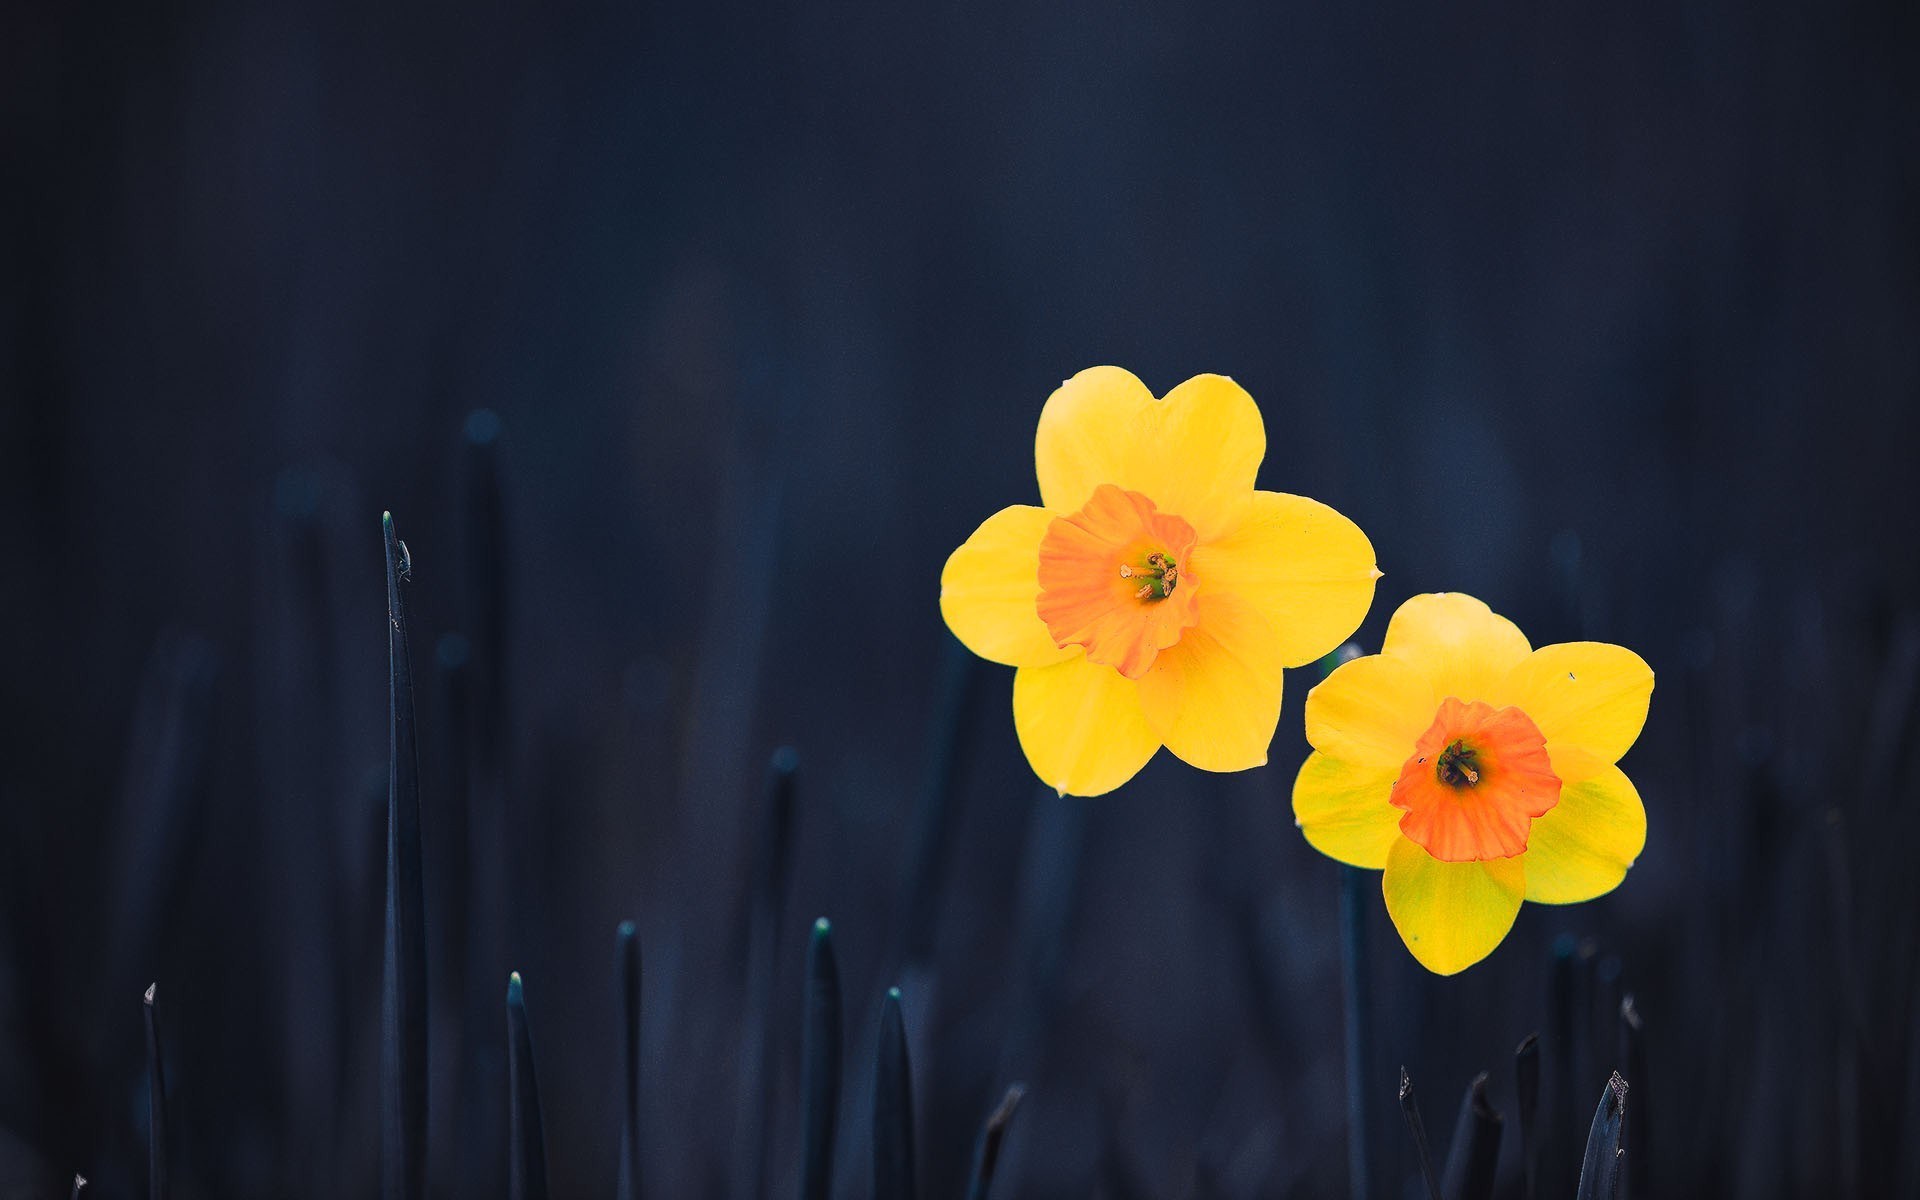 Daffodils Flowers Image And Wallpaper